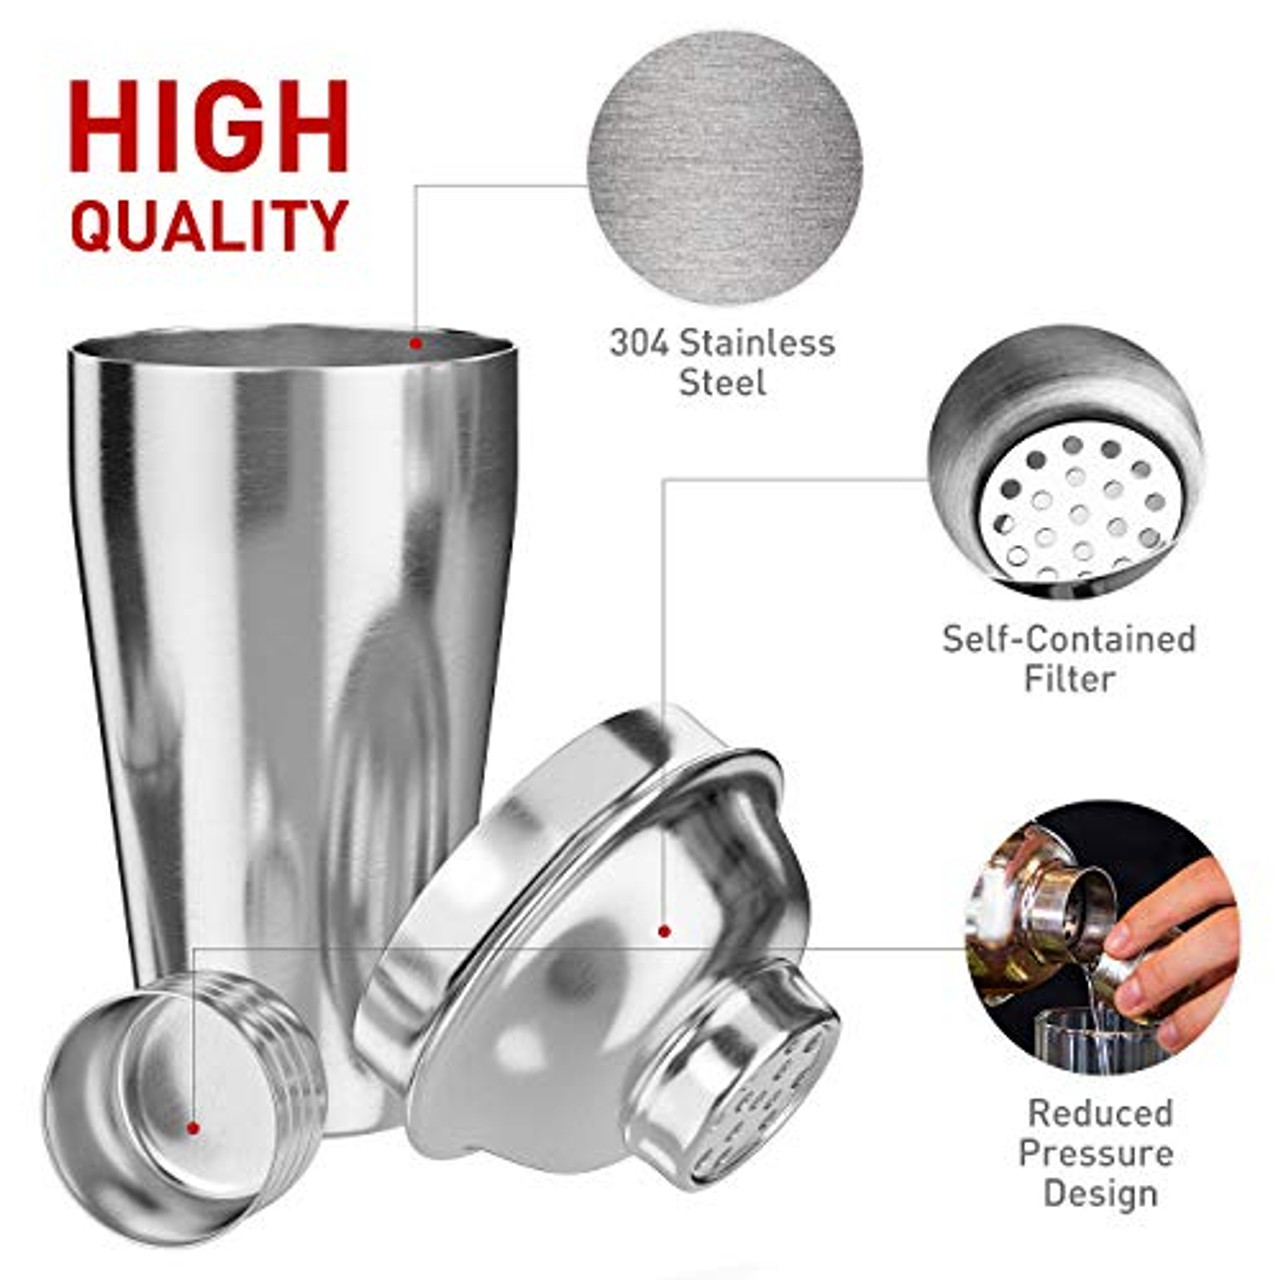 Huewind 24-Piece Cocktail Shaker Set, Stainless Steel Bartender Kit  Professional Bar Tools with Acrylic Stand & Cocktail Recipes Booklet 